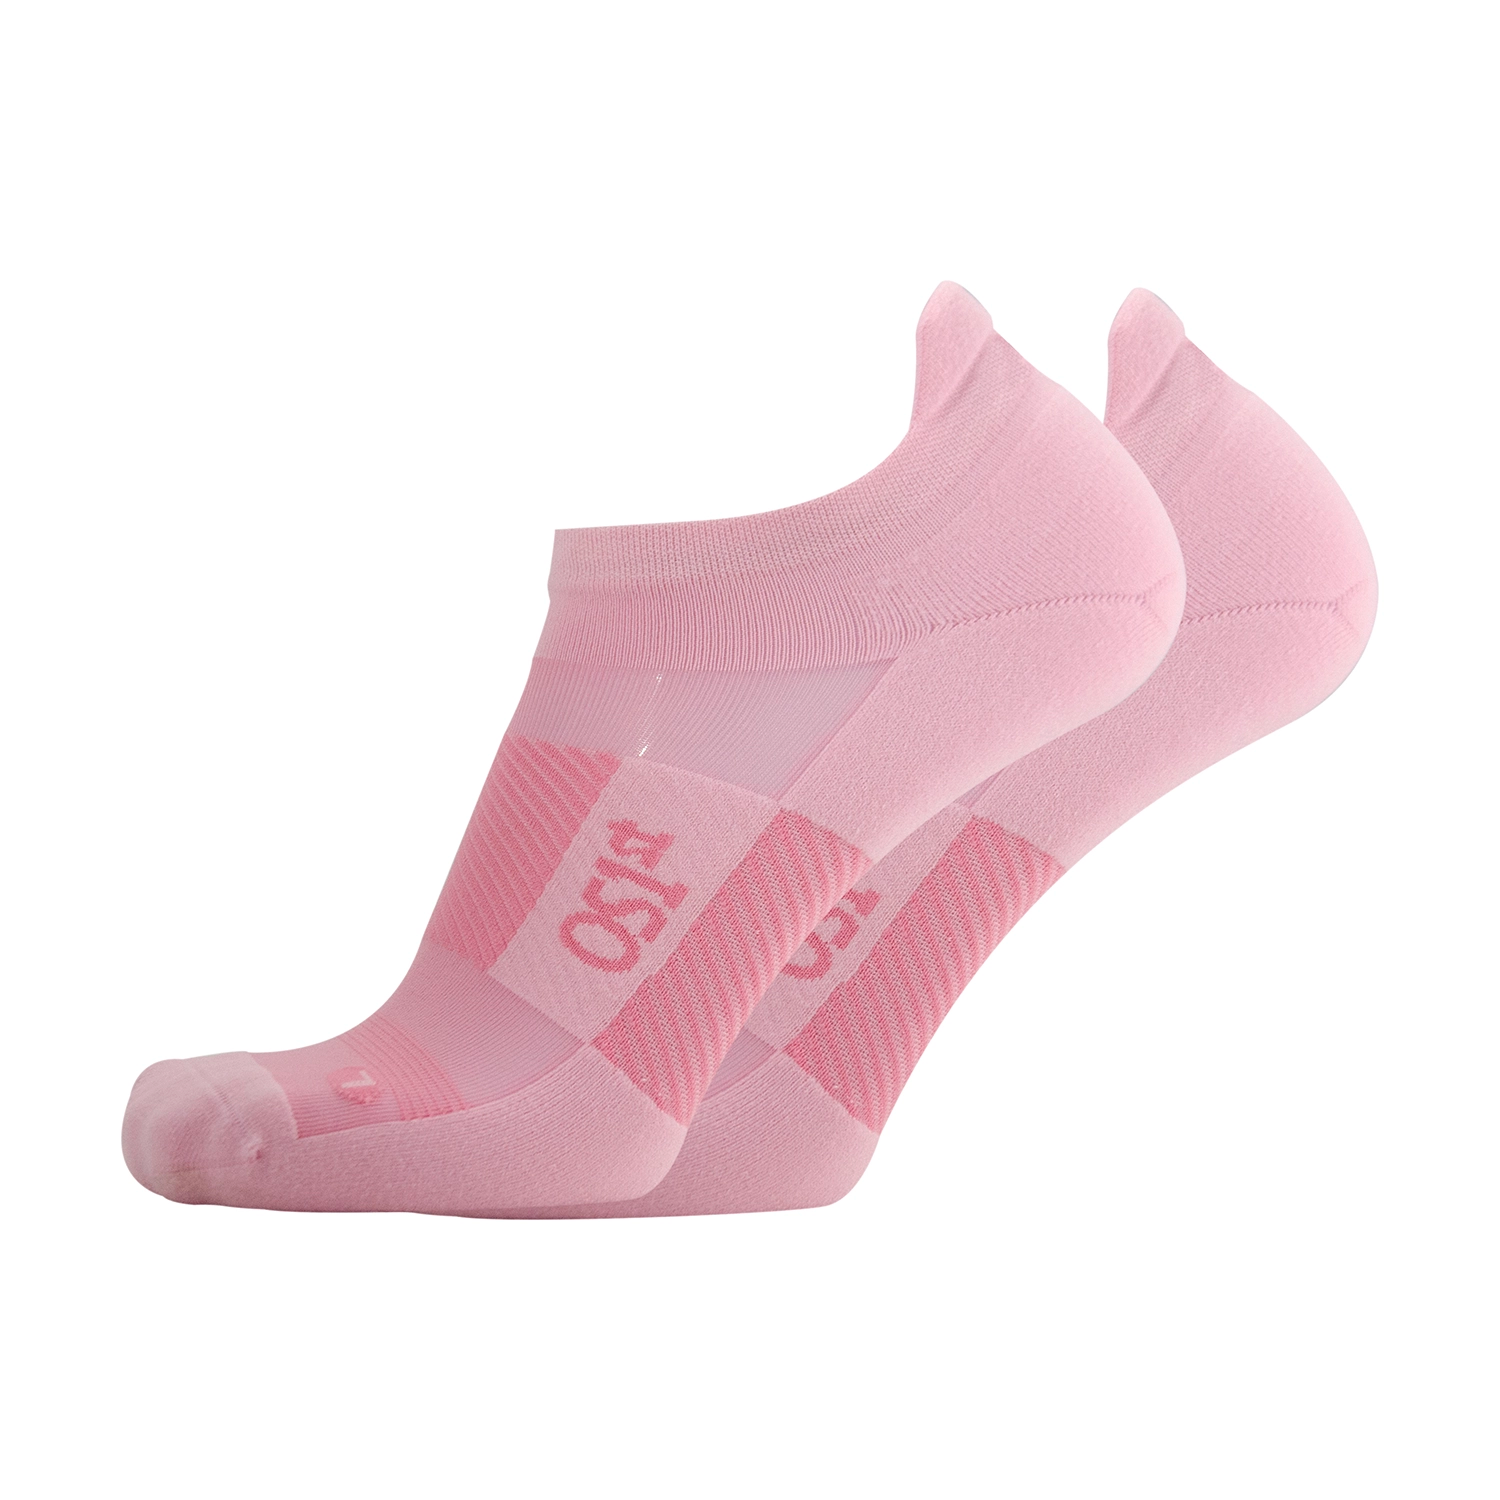 Thin air performance socks in pink | OS1st